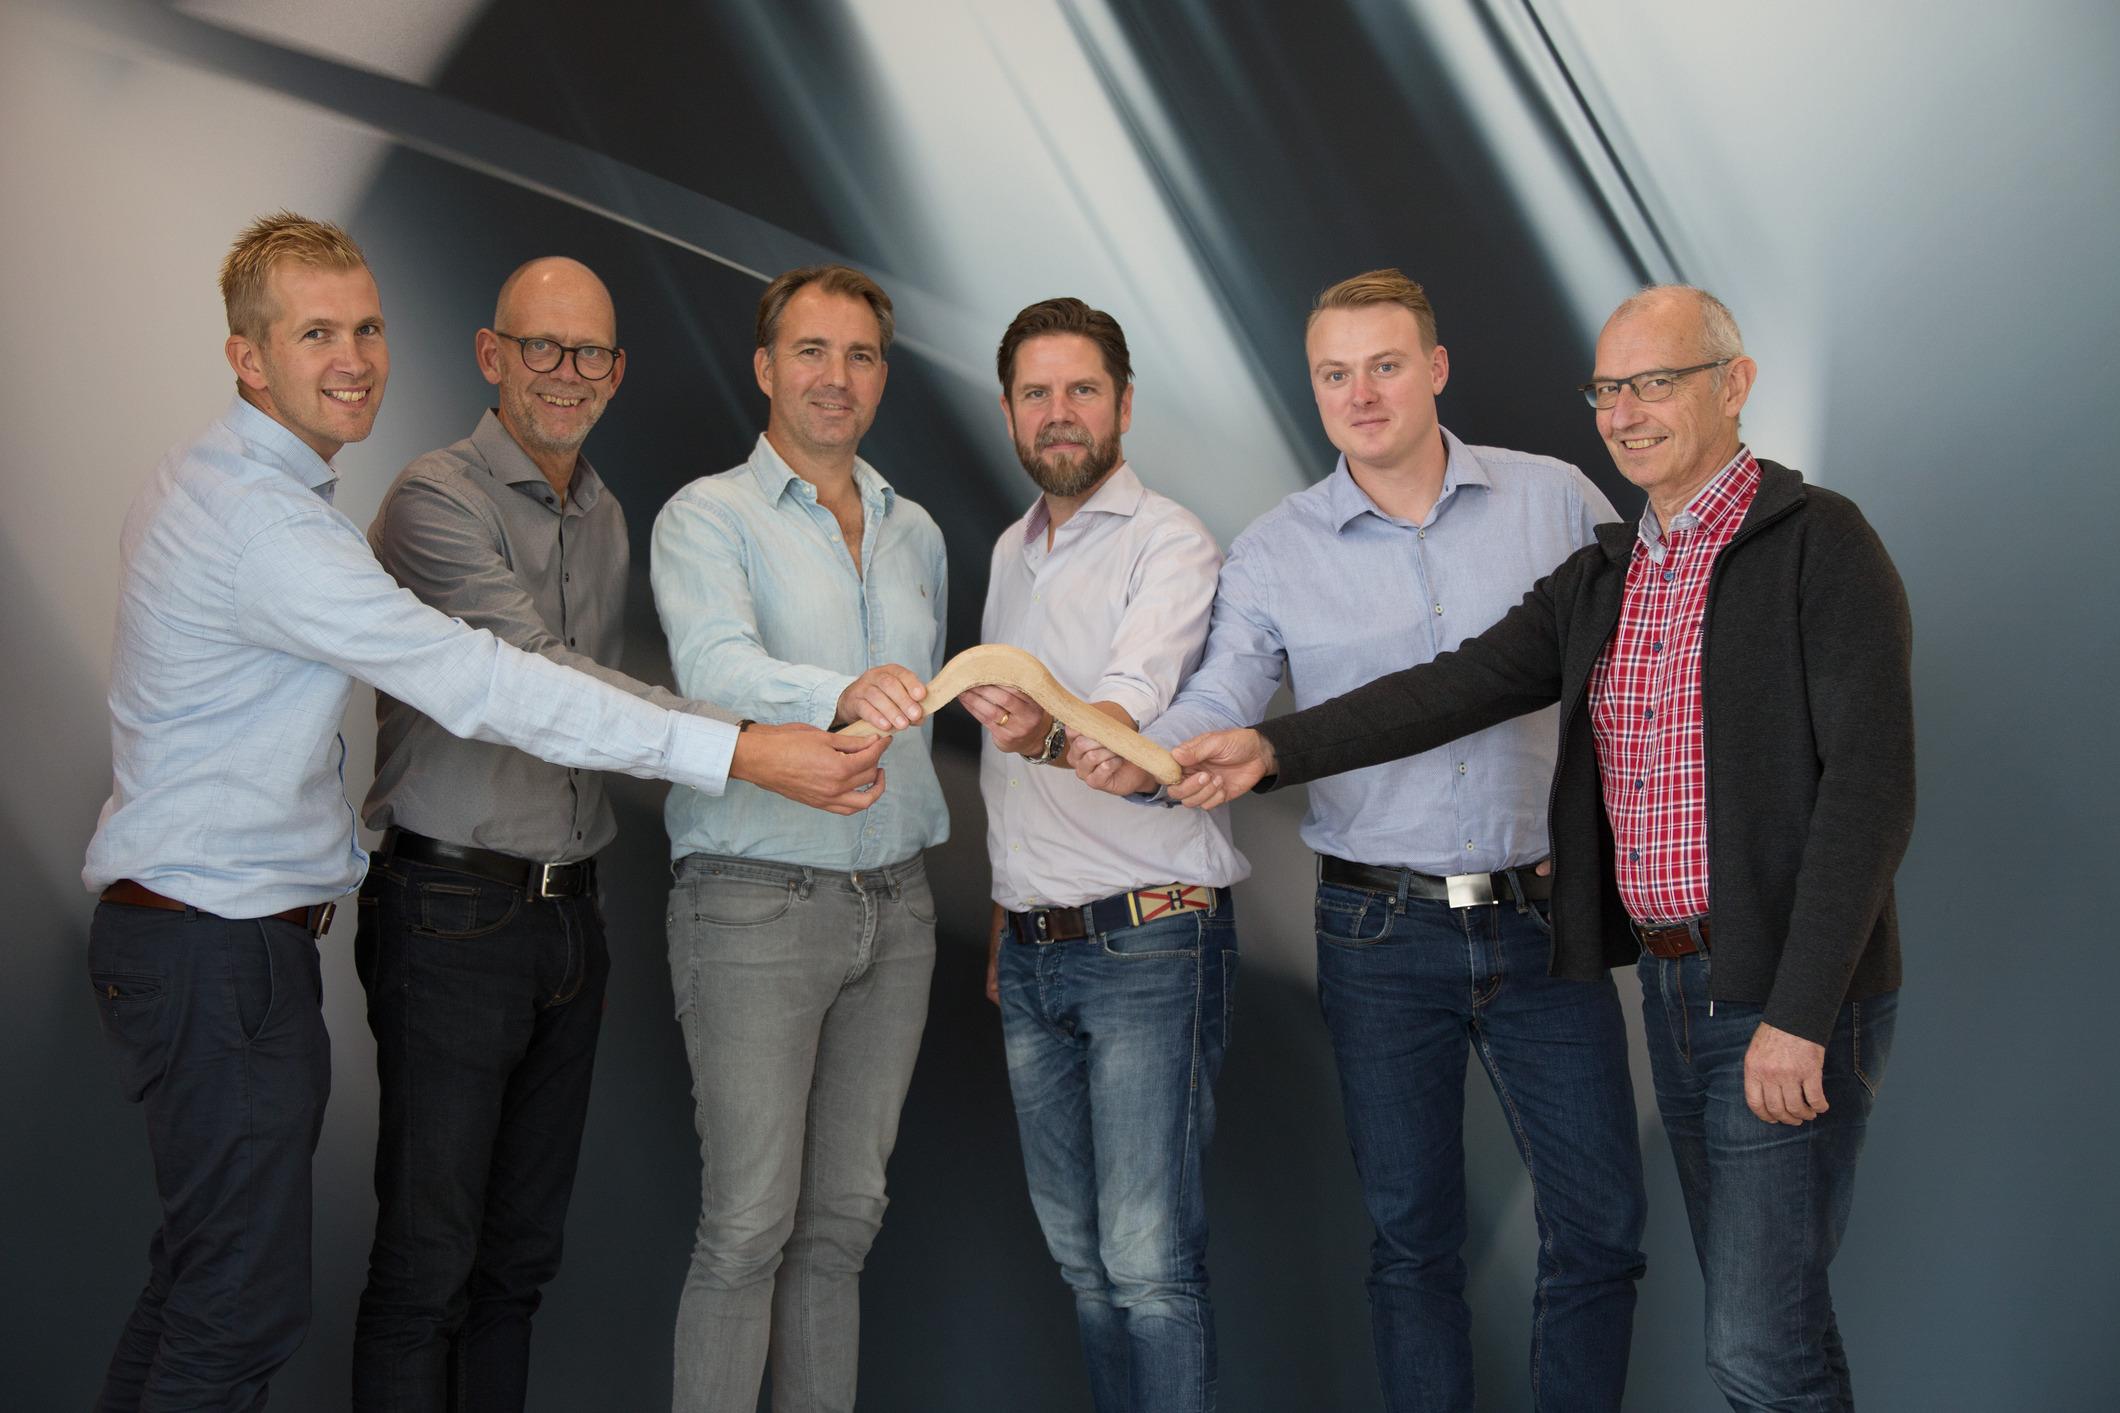 Climate smart hanger, pictured from left with  Kristian Broberg and Peder Jungmalm, AP&T, Anders Nylander and Patrik Enbacka, Ekoligens AB, and Andreas Grendel and Per-Arne Mattsson, AP&T.